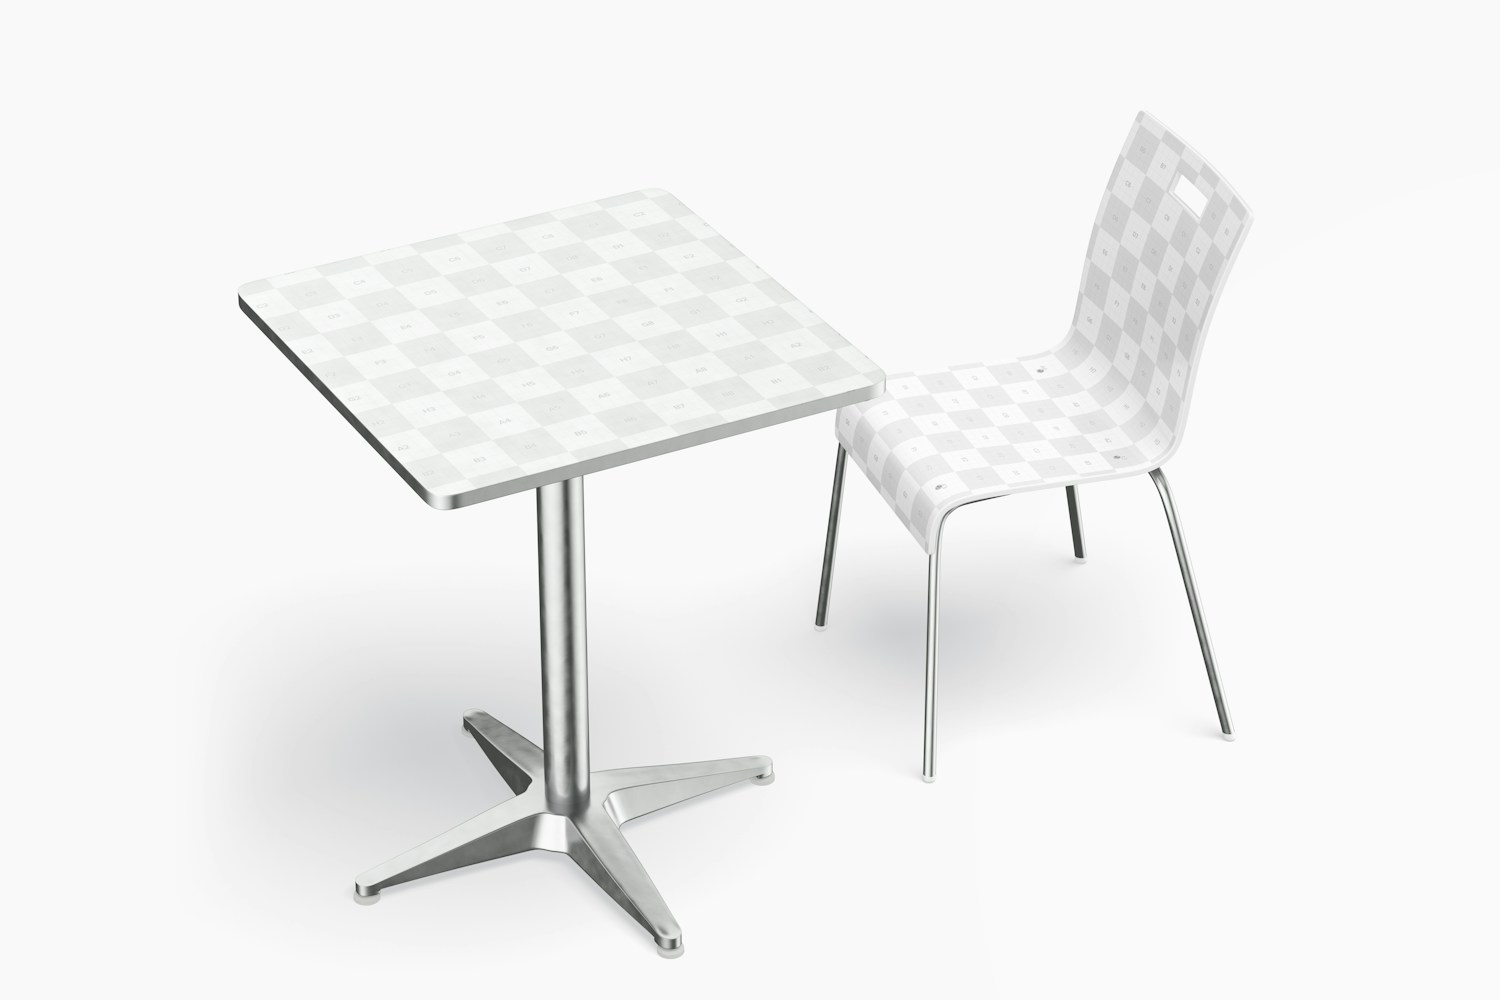 Square Aluminum Restaurant Table with Chair Mockup